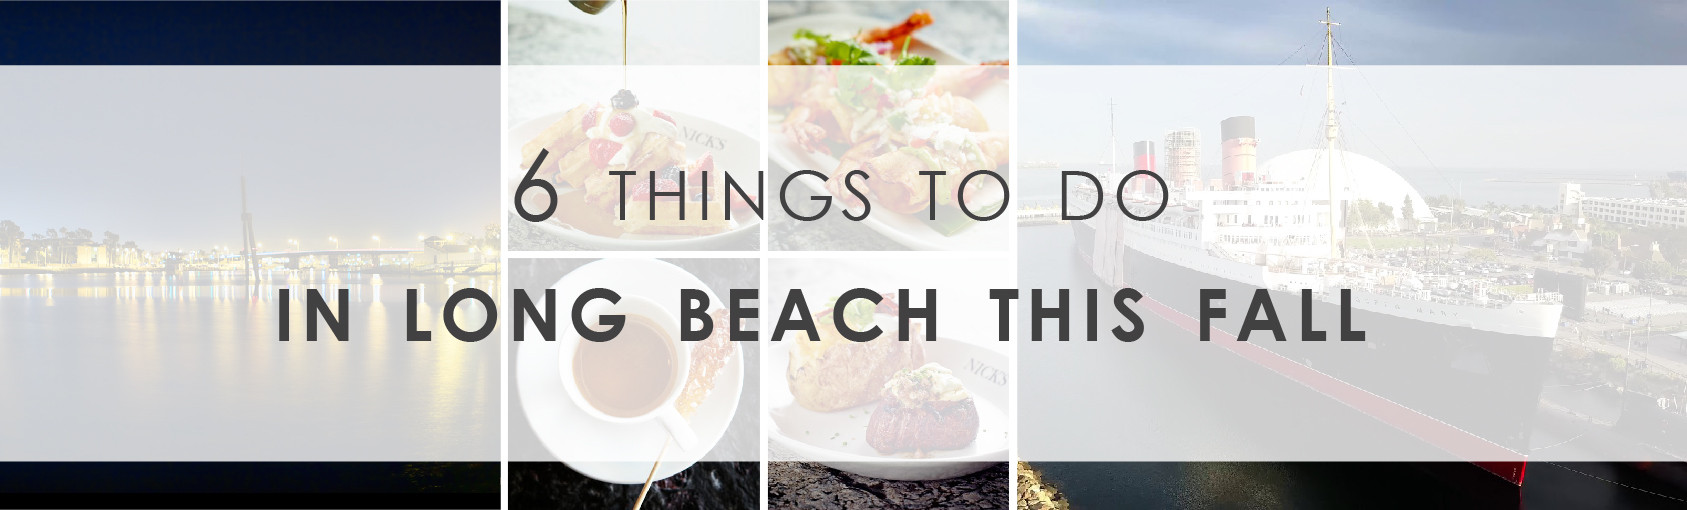 6 Things to Do in LB This Fall Bannner